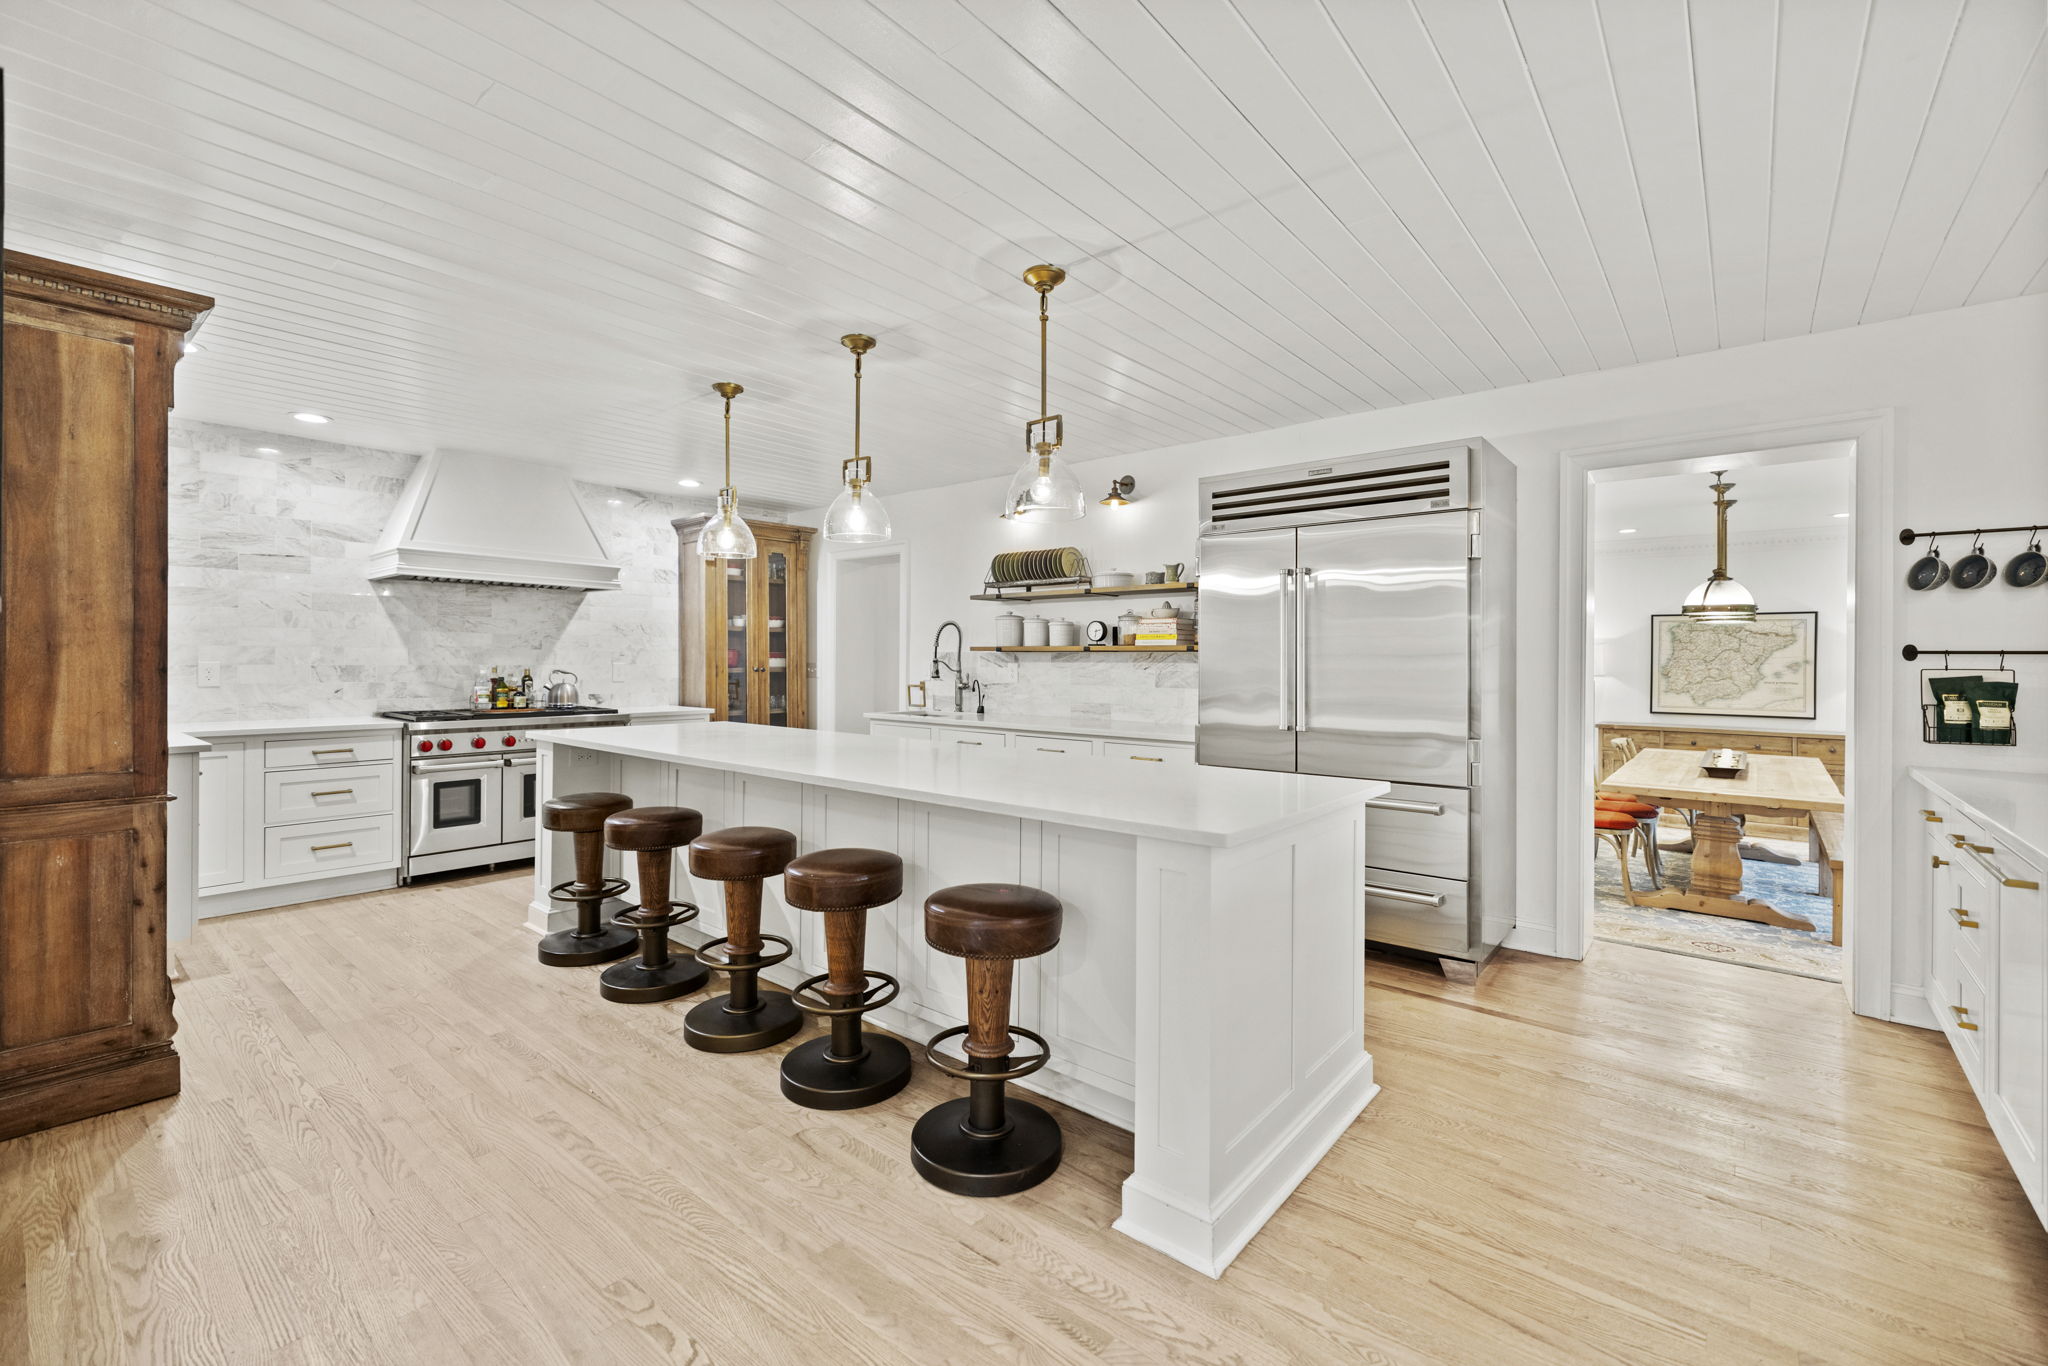 Gourmet Chef's Kitchen with ample Counter space and Storage